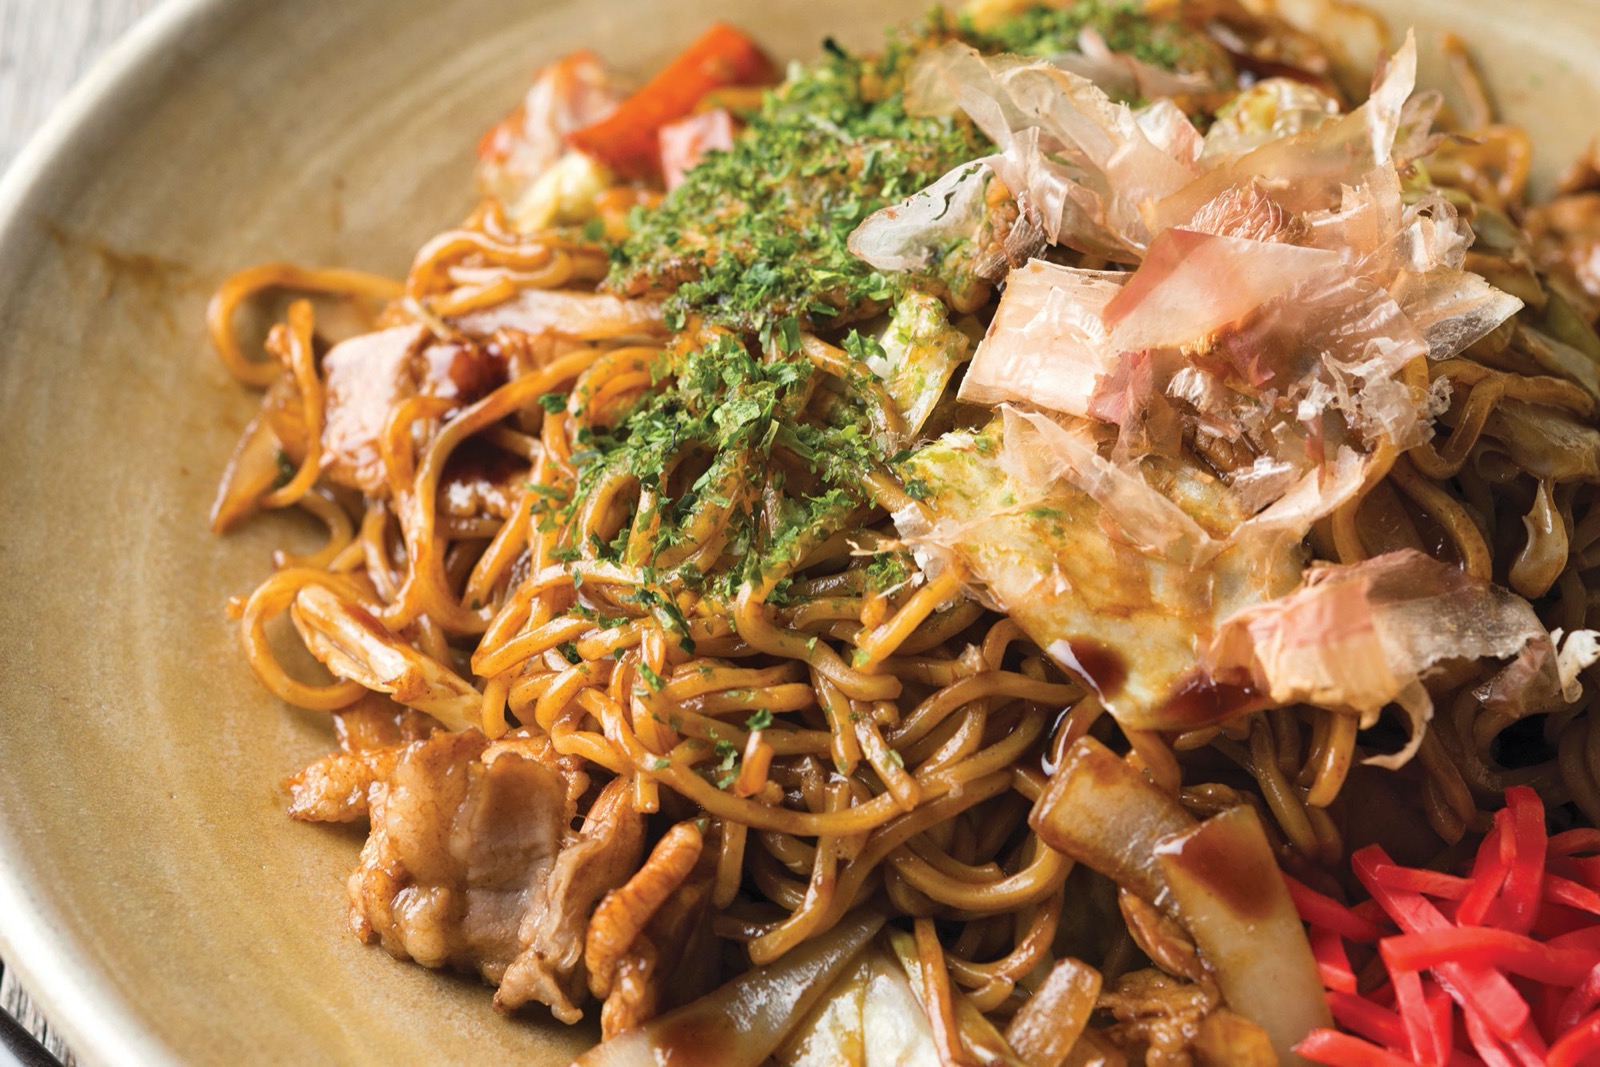 We’ll Honestly Be Impressed If You Score 17/22 on This General Knowledge Quiz Yakisoba (stir fried noodles with pork, cabbage, and ginger)